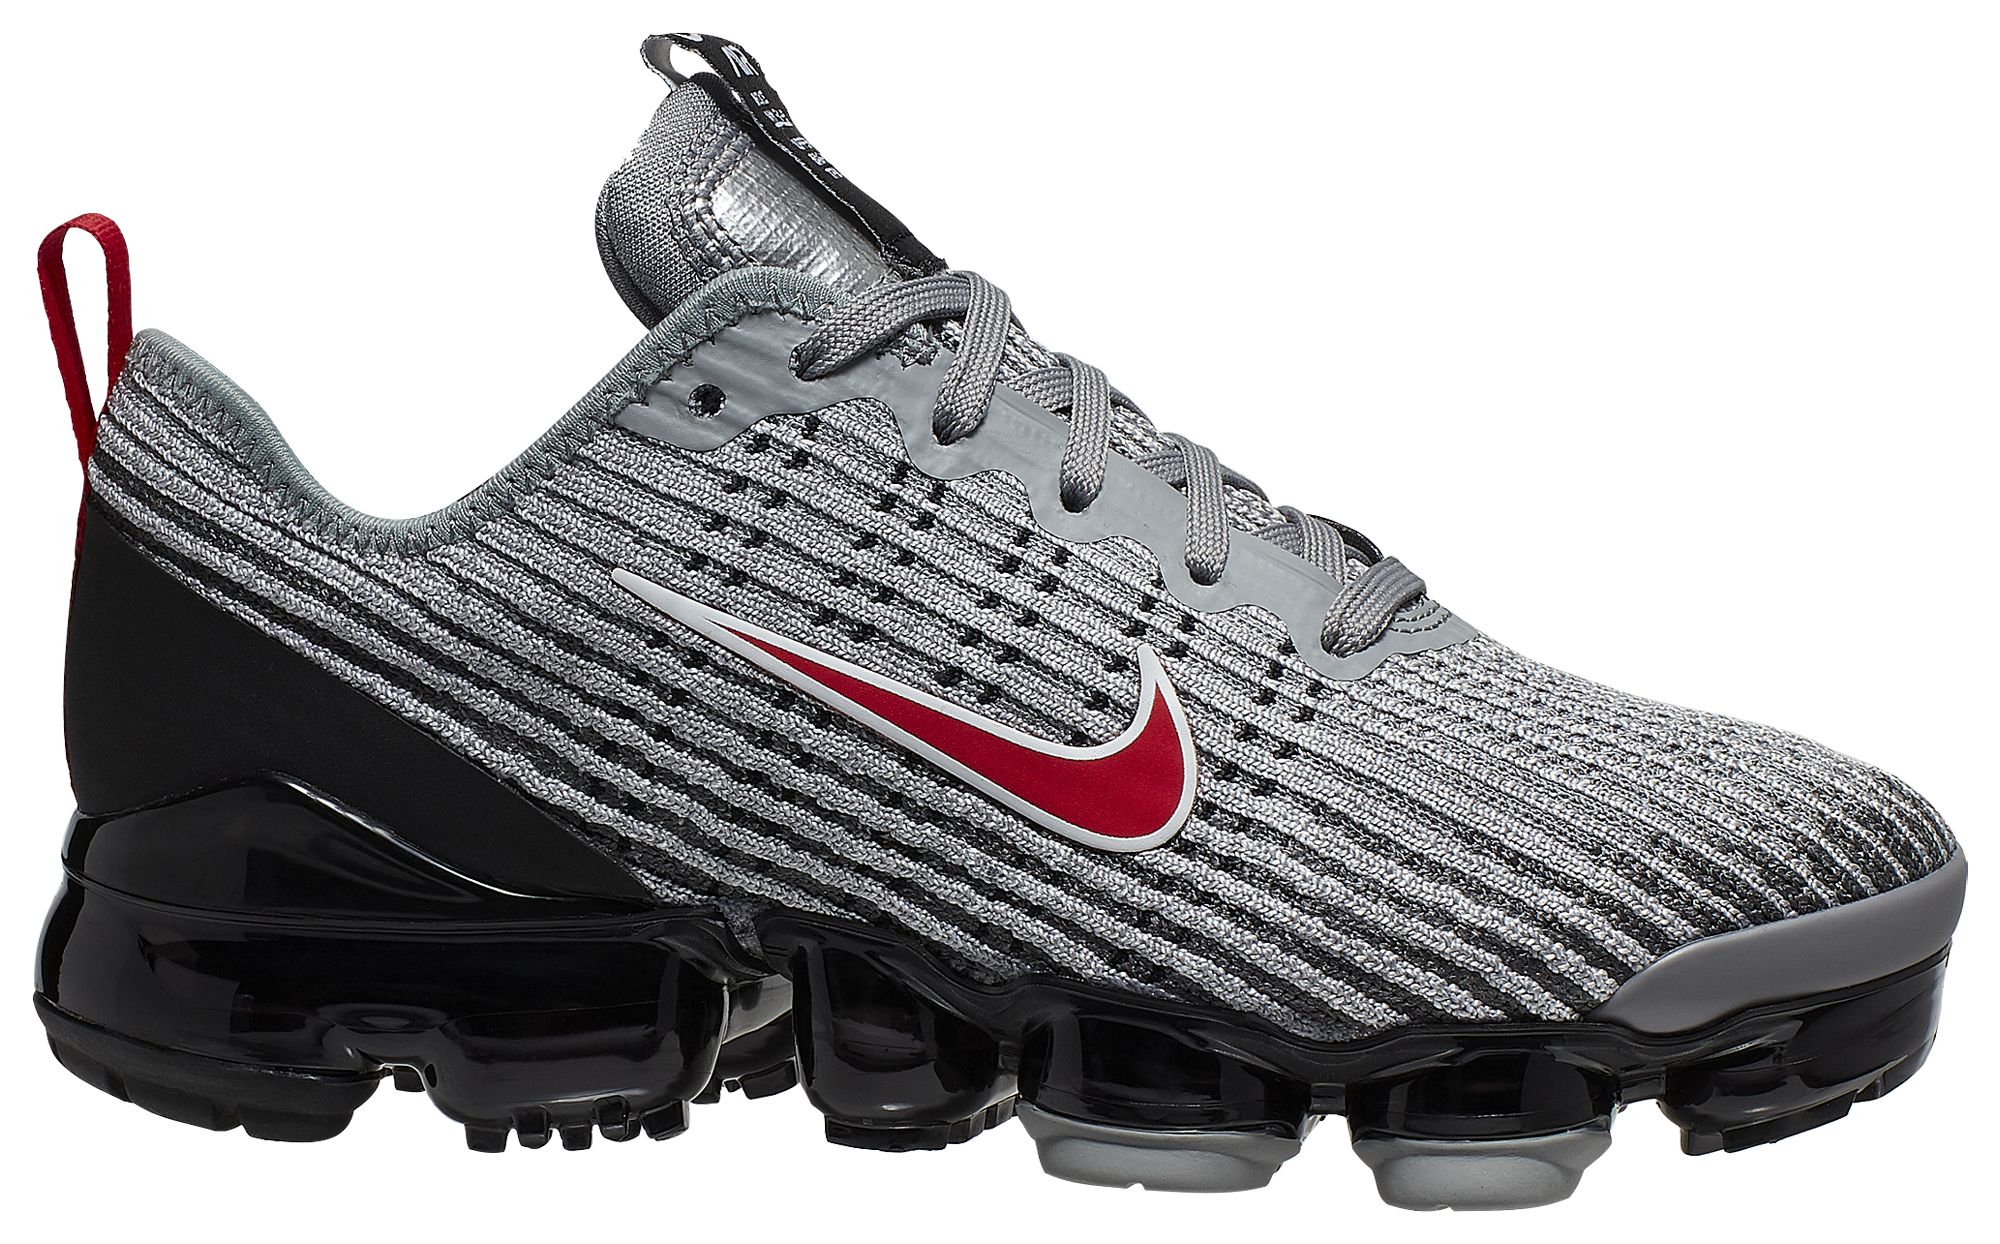 Product nike air vapormax 97 mens A7291700.html Champs